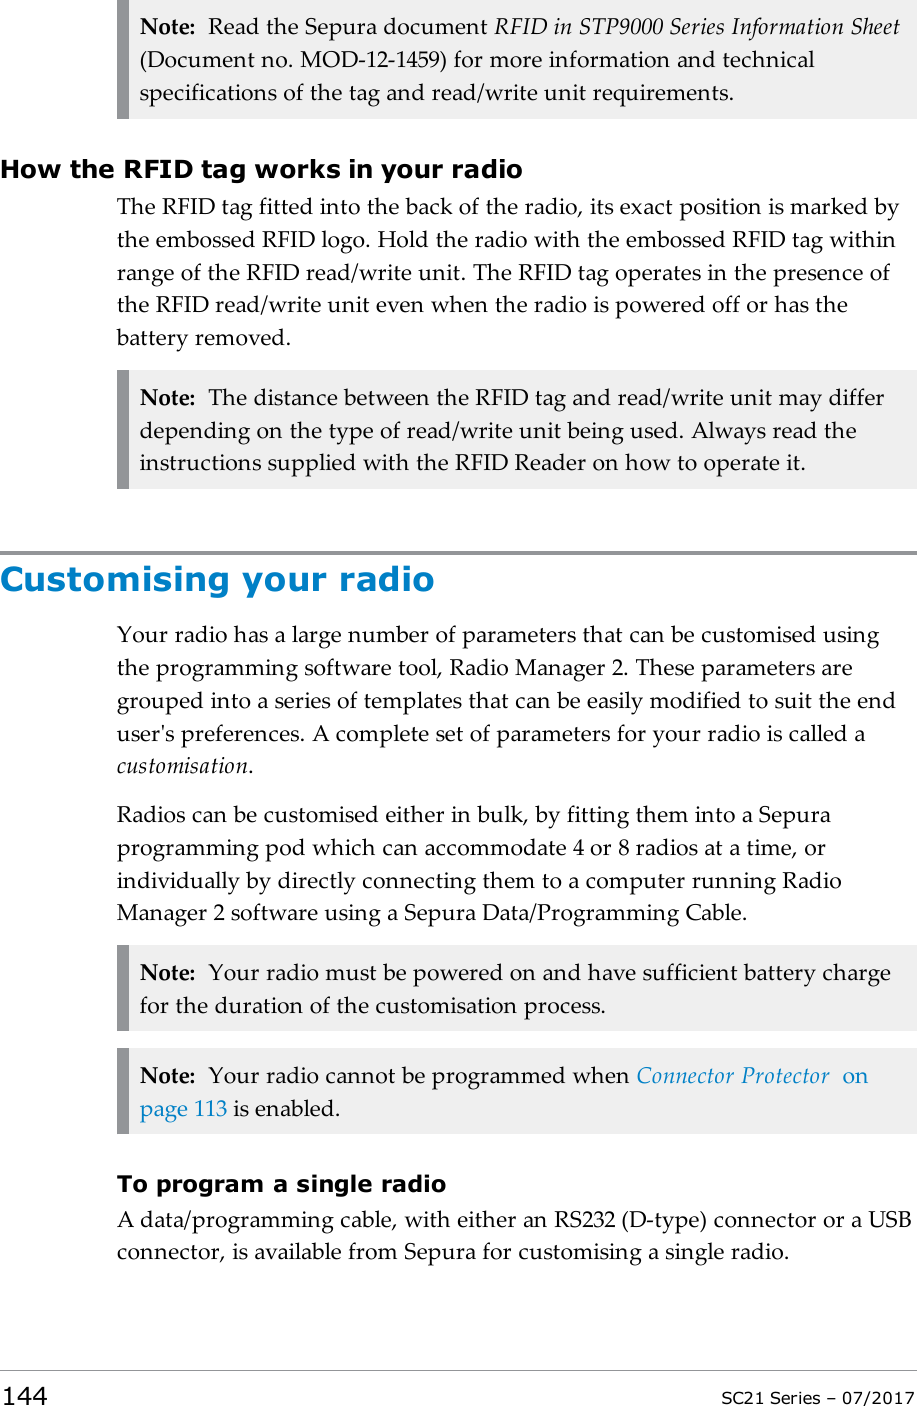 Note: Read the Sepura document RFID in STP9000 Series Information Sheet(Document no. MOD-12-1459) for more information and technicalspecifications of the tag and read/write unit requirements.How the RFID tag works in your radioThe RFID tag fitted into the back of the radio, its exact position is marked bythe embossed RFID logo. Hold the radio with the embossed RFIDtag withinrange of the RFID read/write unit. The RFID tag operates in the presence ofthe RFID read/write unit even when the radio is powered off or has thebattery removed.Note: The distance between the RFID tag and read/write unit may differdepending on the type of read/write unit being used. Always read theinstructions supplied with the RFIDReader on how to operate it.Customising your radioYour radio has a large number of parameters that can be customised usingthe programming software tool, Radio Manager 2. These parameters aregrouped into a series of templates that can be easily modified to suit the enduser&apos;s preferences. A complete set of parameters for your radio is called acustomisation.Radios can be customised either in bulk, by fitting them into a Sepuraprogramming pod which can accommodate 4 or 8 radios at a time, orindividually by directly connecting them to a computer running RadioManager 2 software using a Sepura Data/Programming Cable.Note: Your radio must be powered on and have sufficient battery chargefor the duration of the customisation process.Note: Your radio cannot be programmed when Connector Protector onpage113 is enabled.To program a single radioA data/programming cable, with either an RS232 (D-type) connector or a USBconnector, is available from Sepura for customising a single radio.144 SC21 Series – 07/2017